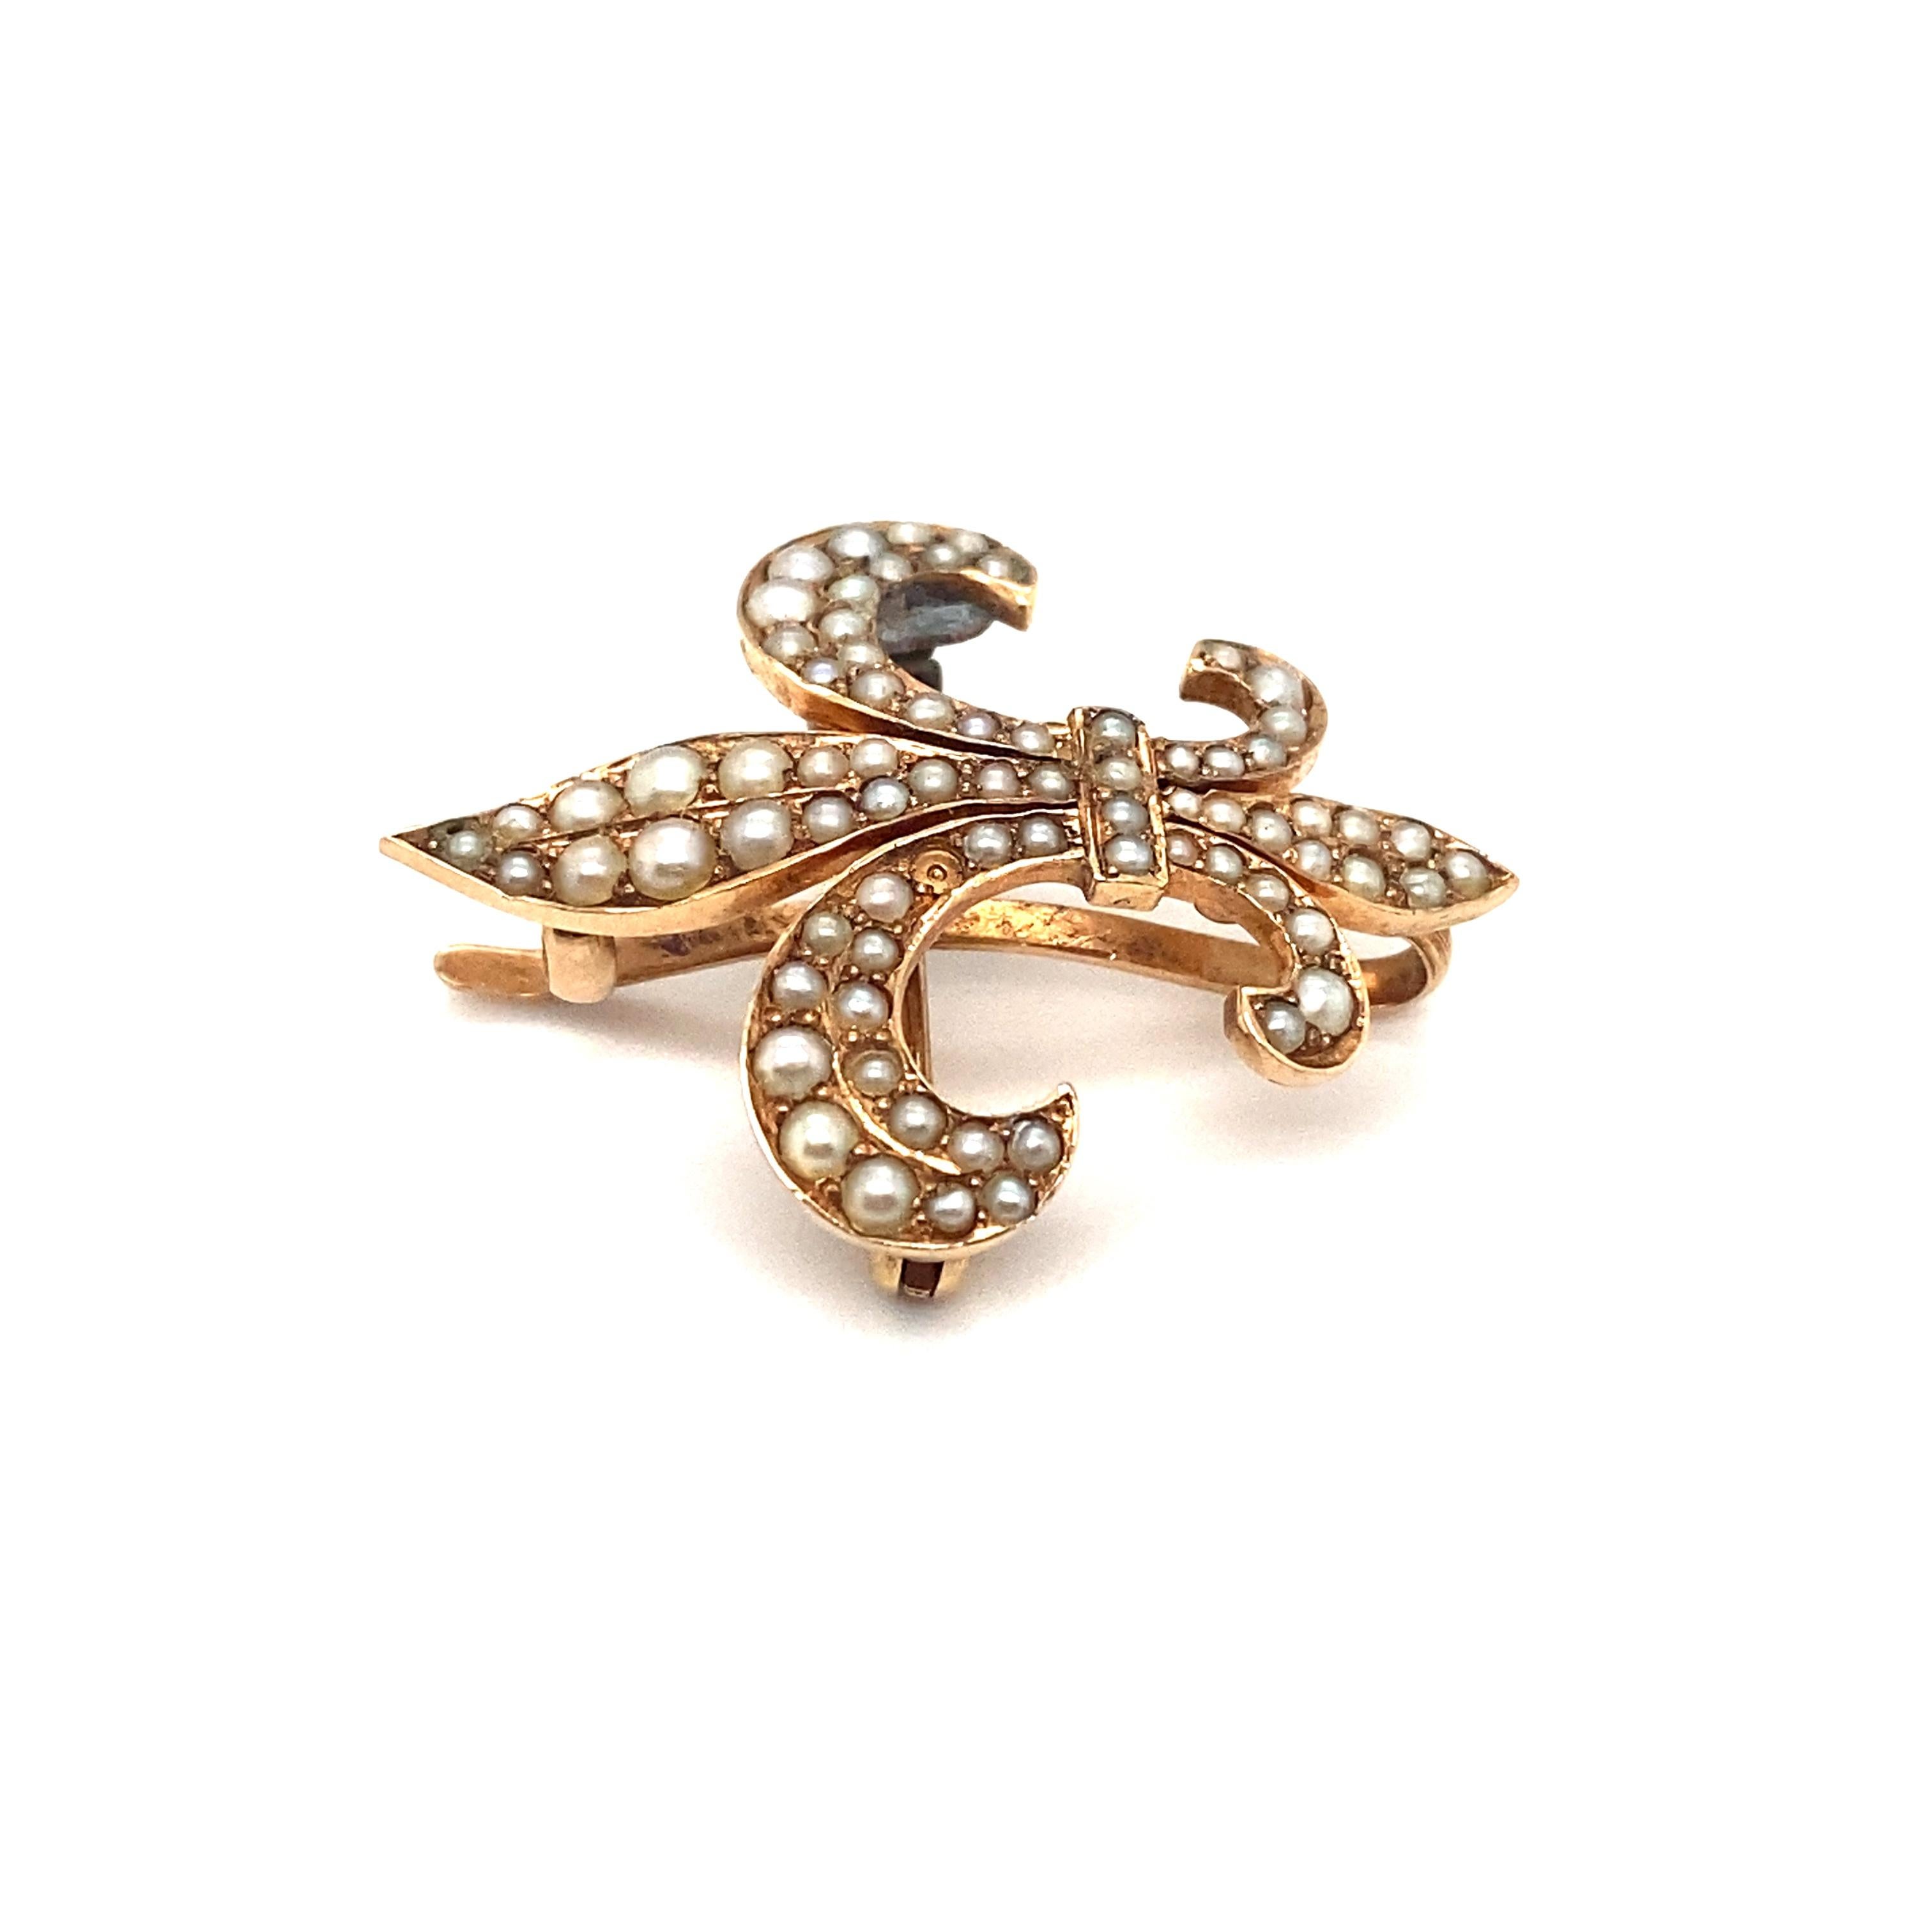 Item Details: This antique brooch is made in France and has a fleur de lis design with seed pearls. 

Circa: 1890s
Metal Type: 14 Karat Yellow Gold with Silver Accents
Weight: 4.6 grams
Size: 1.2 inch length x 1 inch width